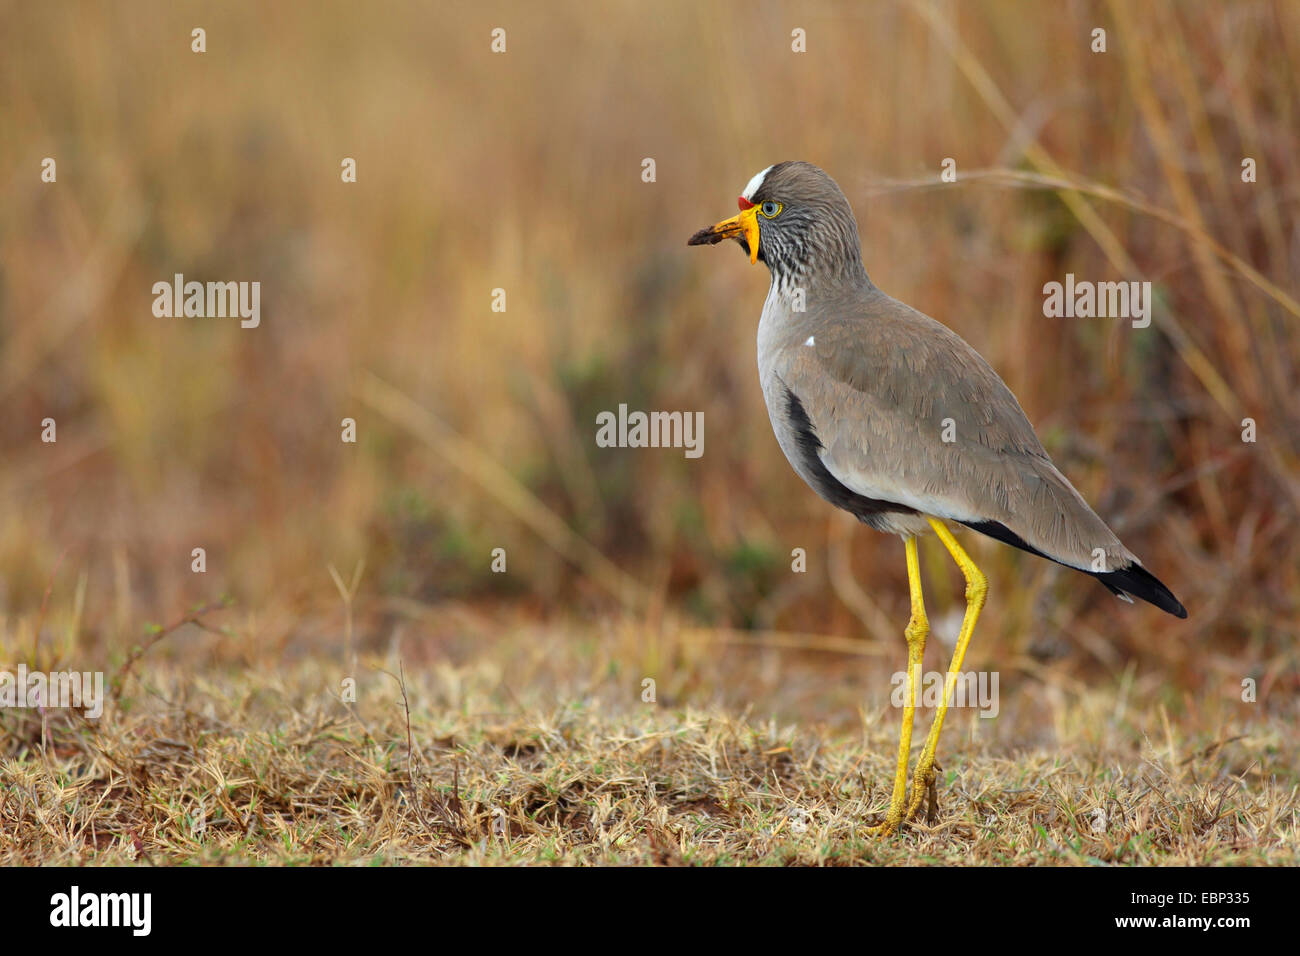 Senegal wattled plover (Vanellus senegallus), standing on the ground, South Africa, Ithala Game Reserve Stock Photo